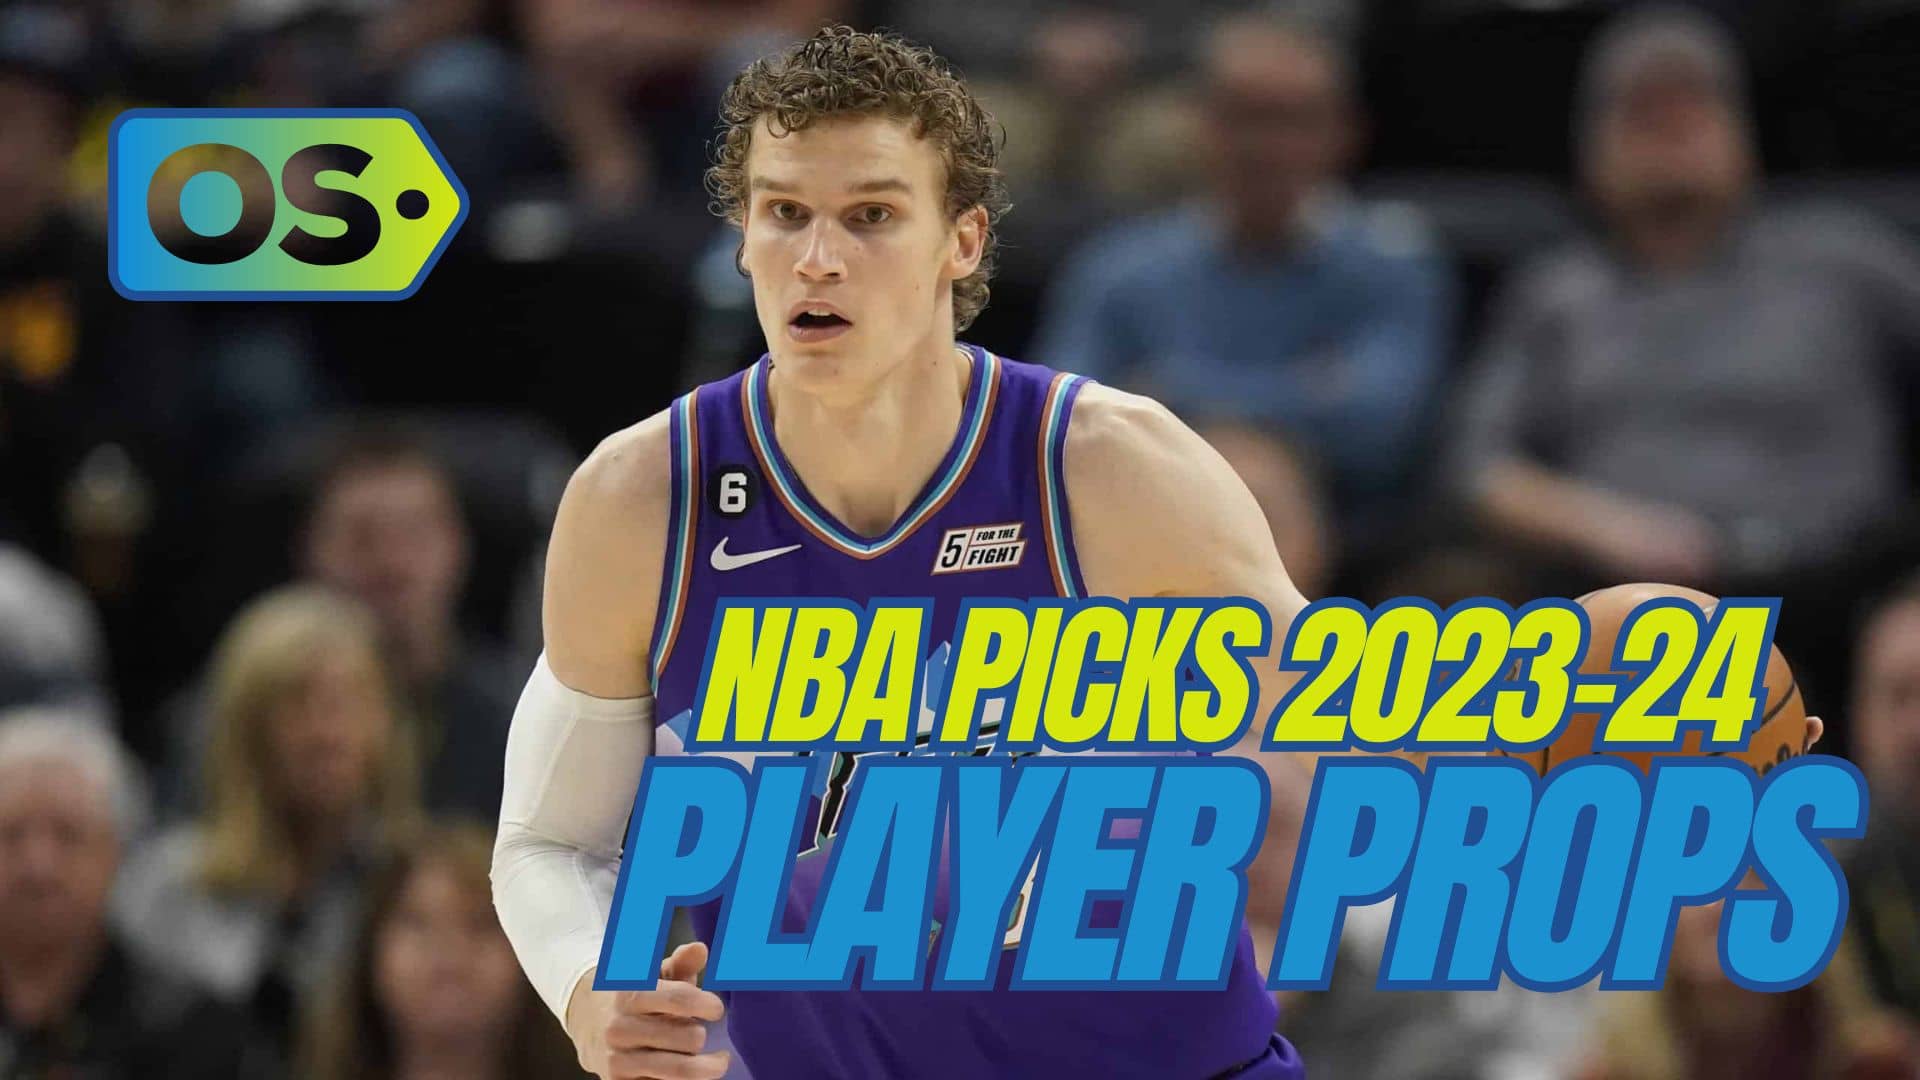 The best NBA player prop bets and picks today for Tuesday, January 23, include wagers on C.J. McCollum and Lauri Markkanen.